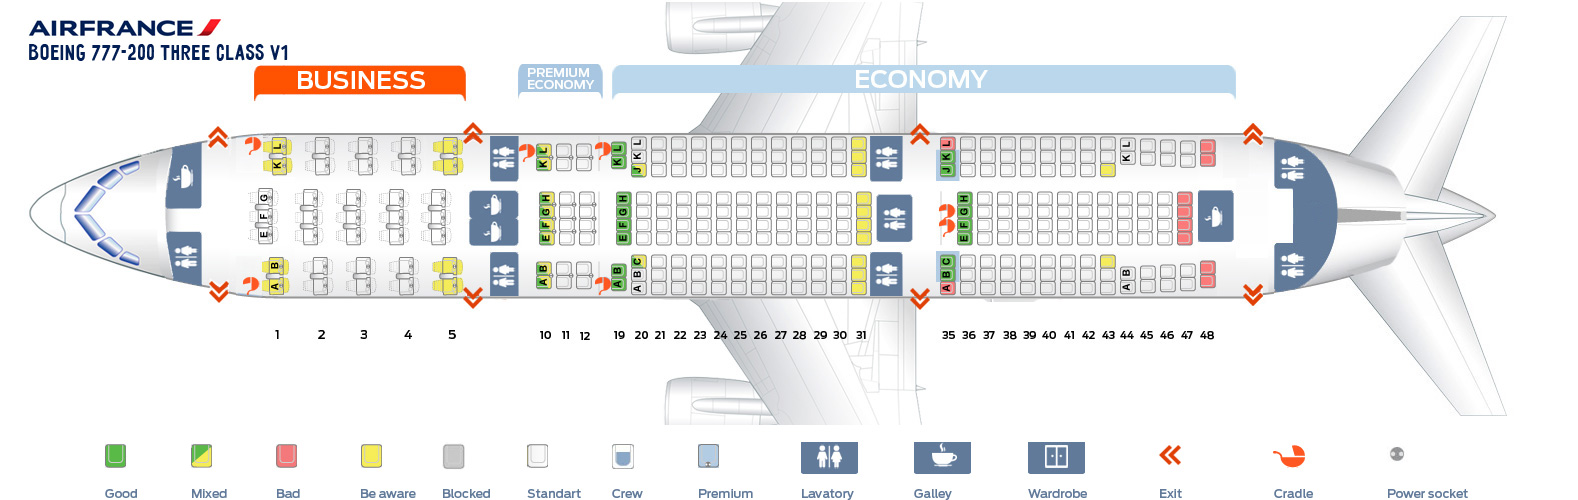 Seat Map Boeing Air France Best Seats In Plane